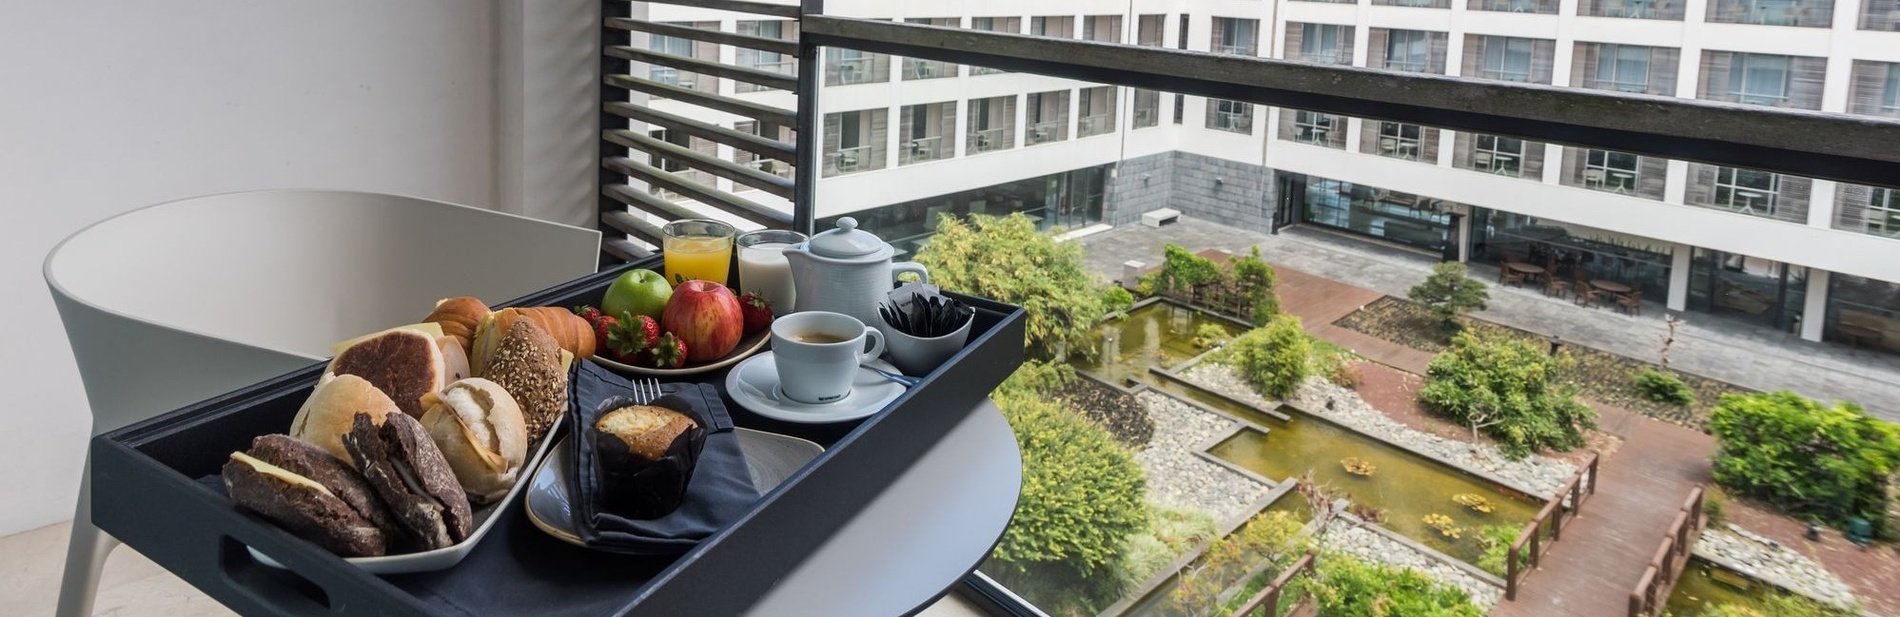 a tray of food sits on a balcony in front of a building